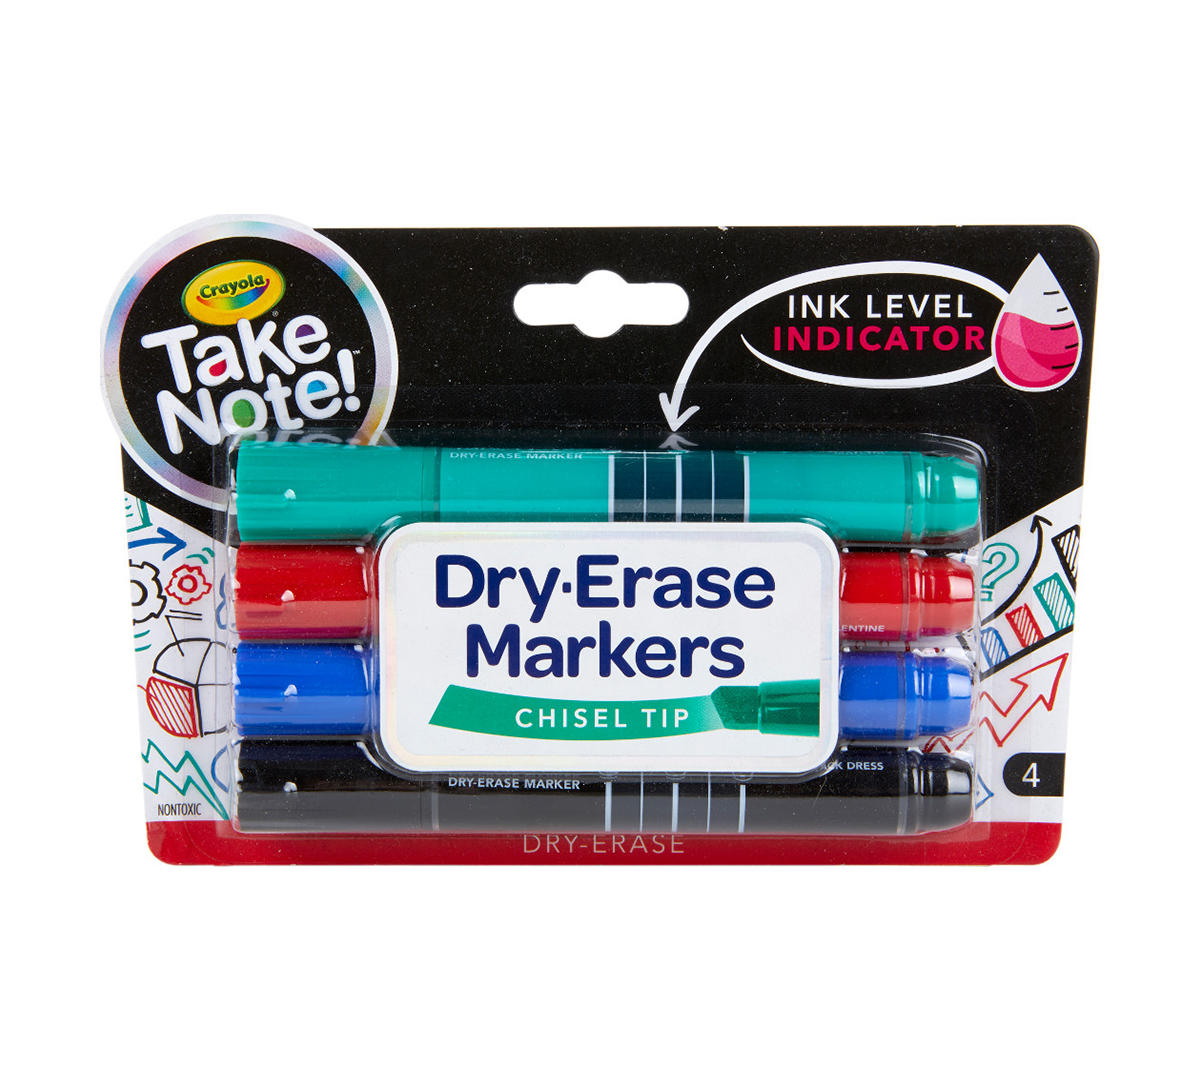 DRY BOARD ERASER 4 MARKERS ASSORTED COLORS BLACK RED GREEN BLUE 